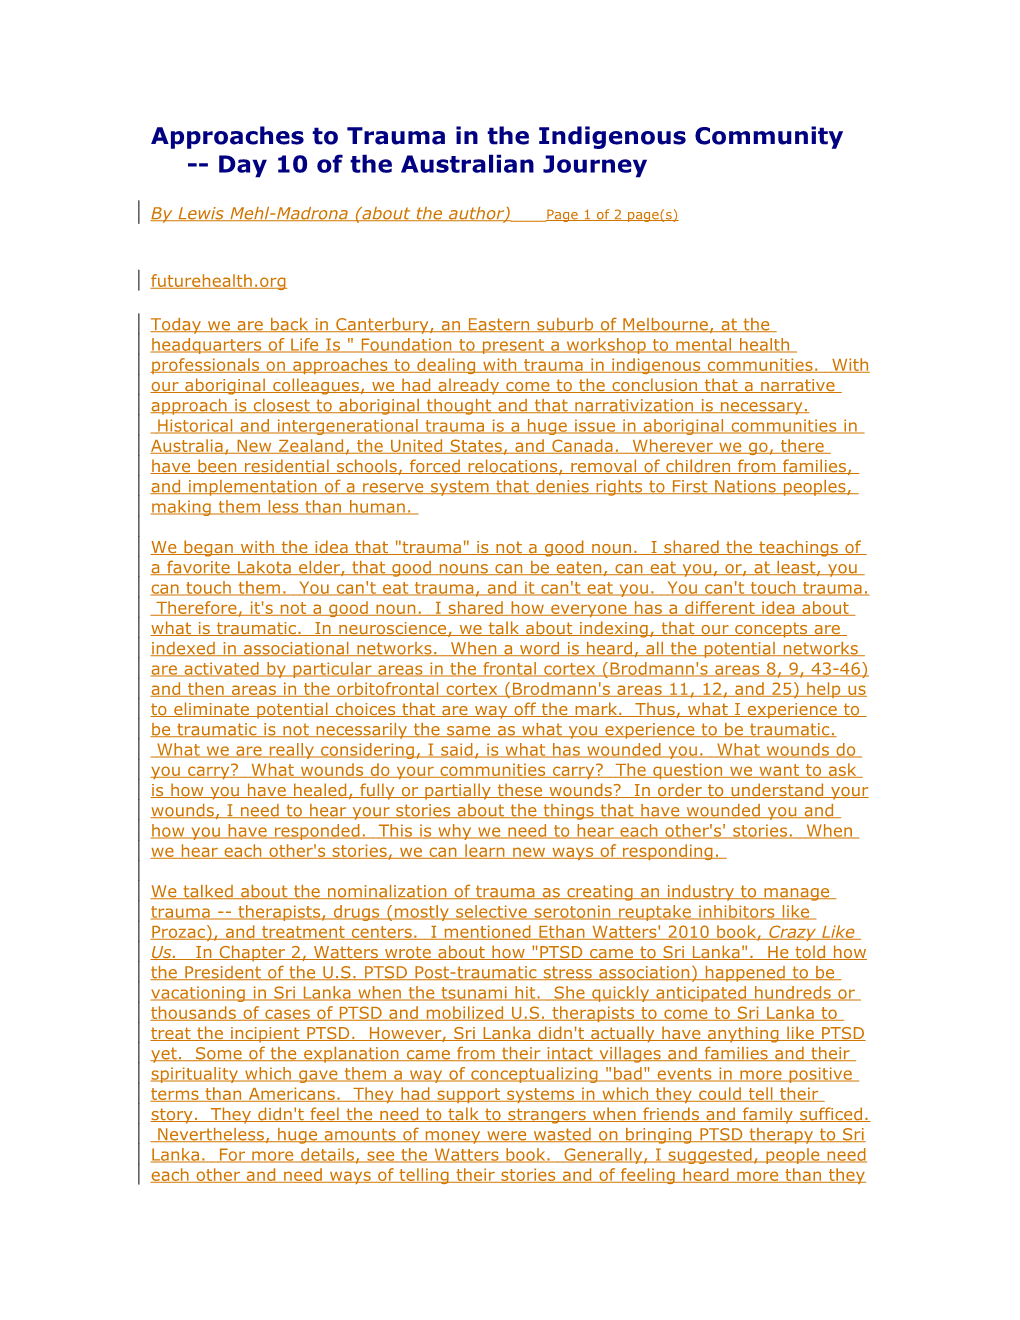 Approaches to Trauma in the Indigenous Community Day 10 of the Australian Journey